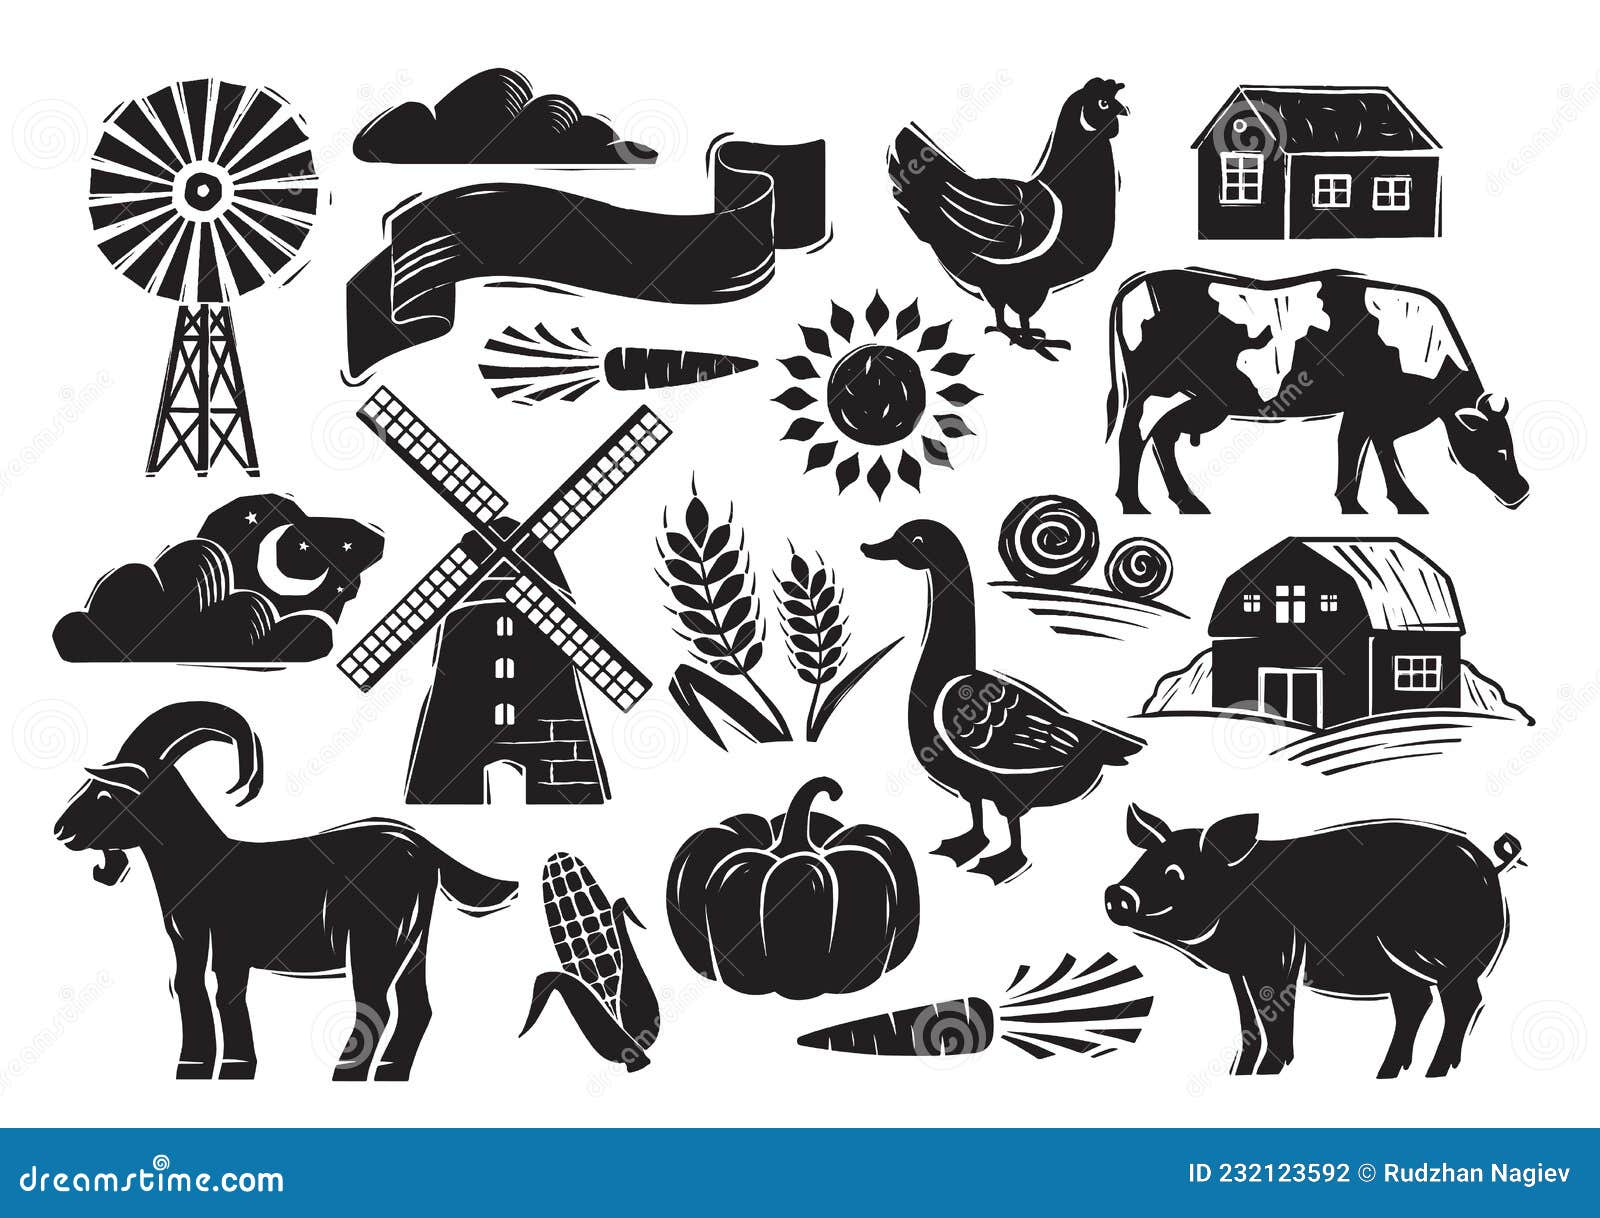 woodcut style farm set with country s on white background